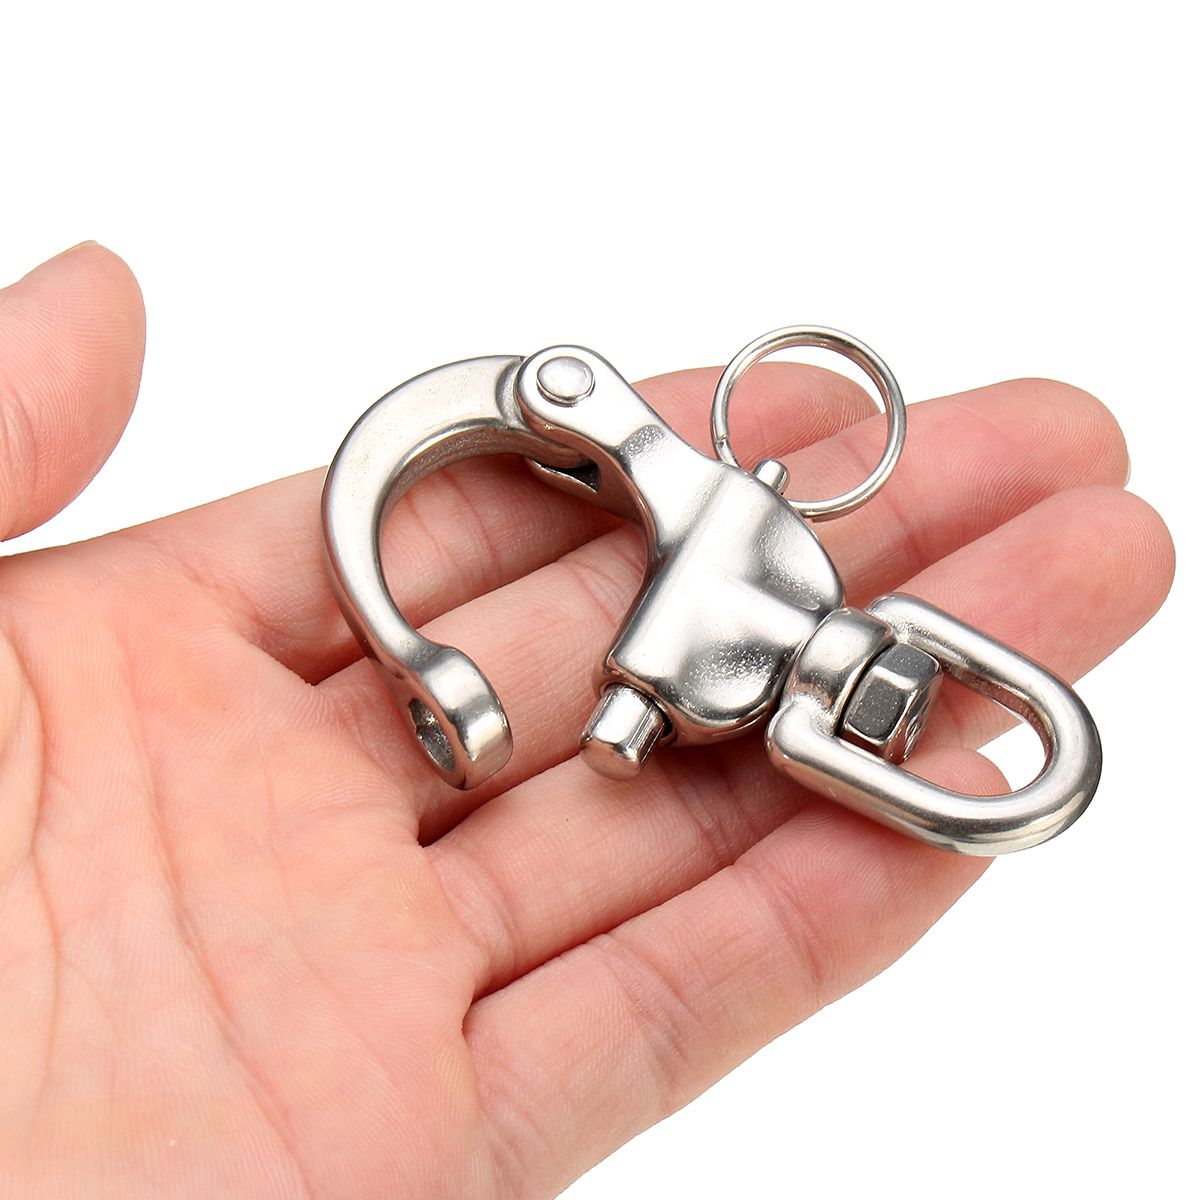 2pcs-316-Stainless-Steel-Quick-Release-Boat-Anchor-Chain-Eye-Shackle-SwiveI-Snap-Hook-1330256